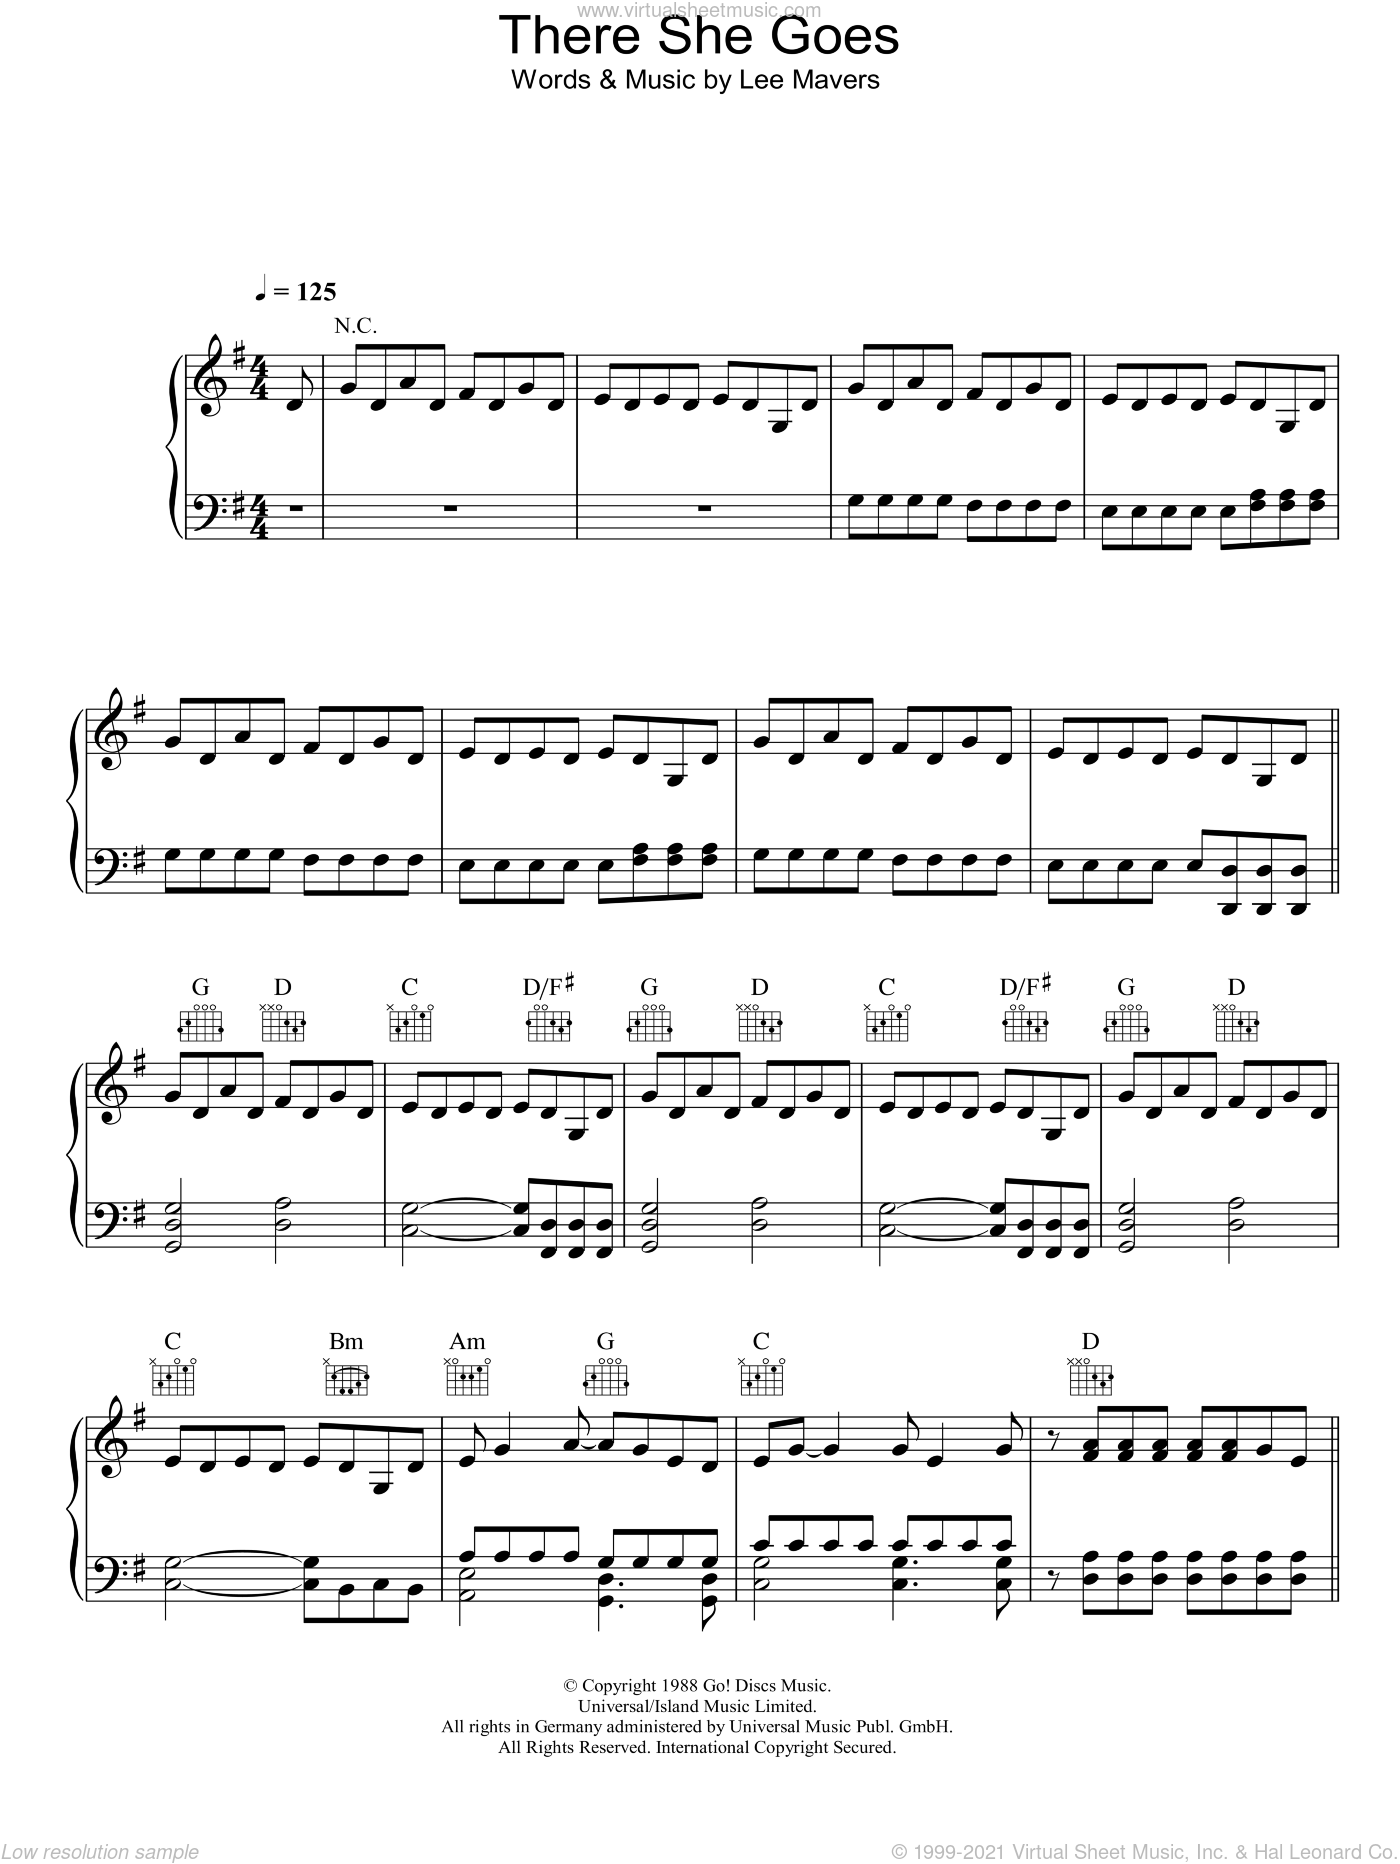 La's - There She Goes sheet music for voice, piano or guitar